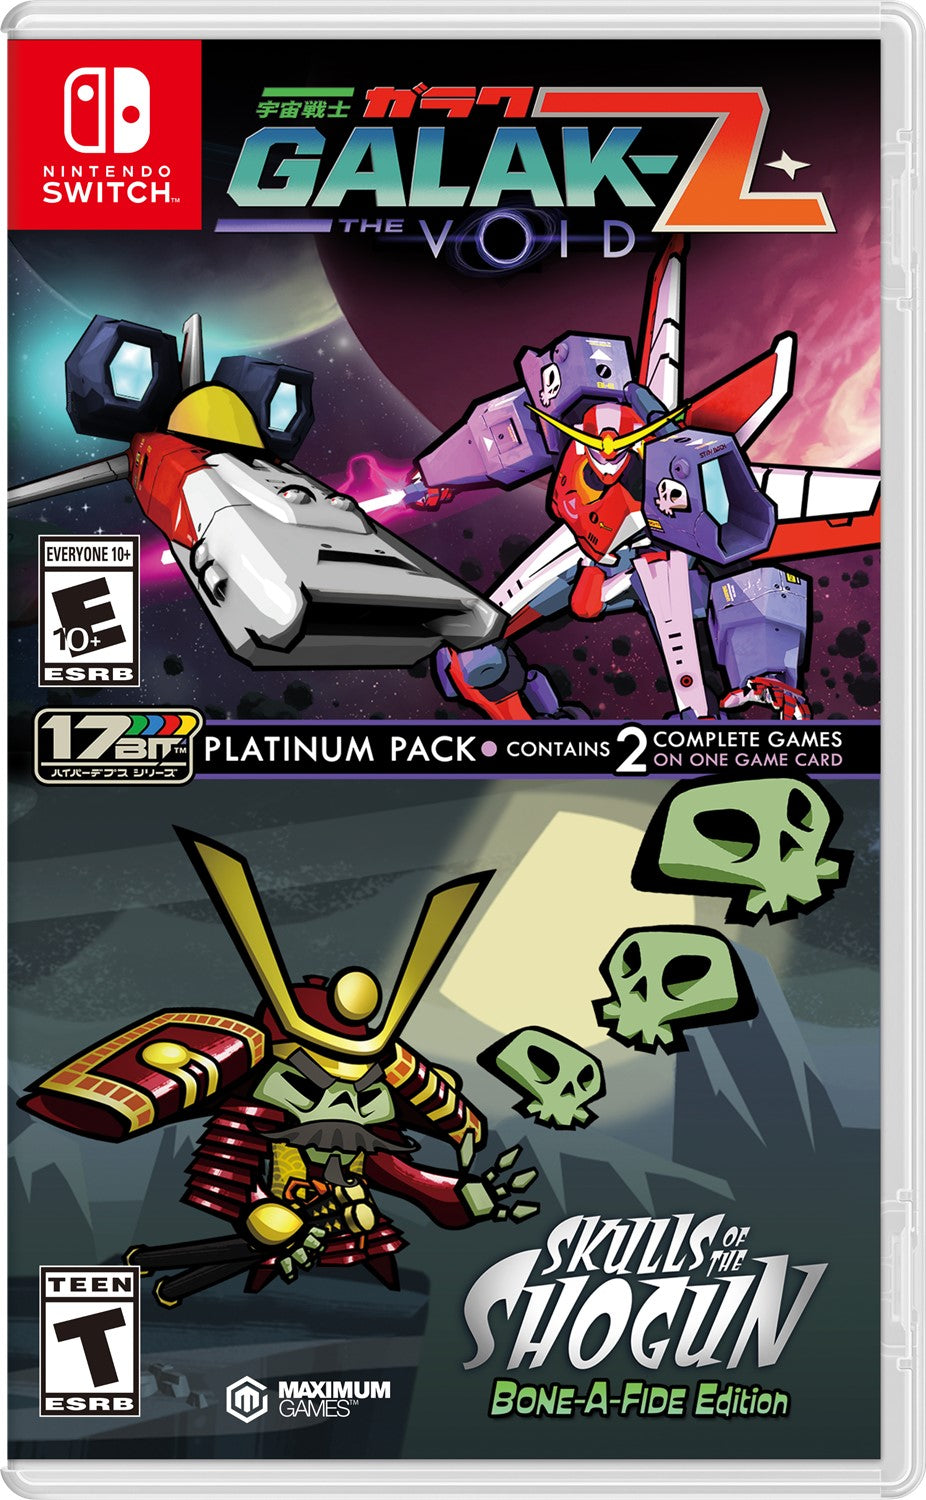 GALAK-Z THE VOID AND SKULLS OF SHOGUN BONE-A-FIDE PLATINUM PACK (NINTENDO SWITCH) - jeux video game-x